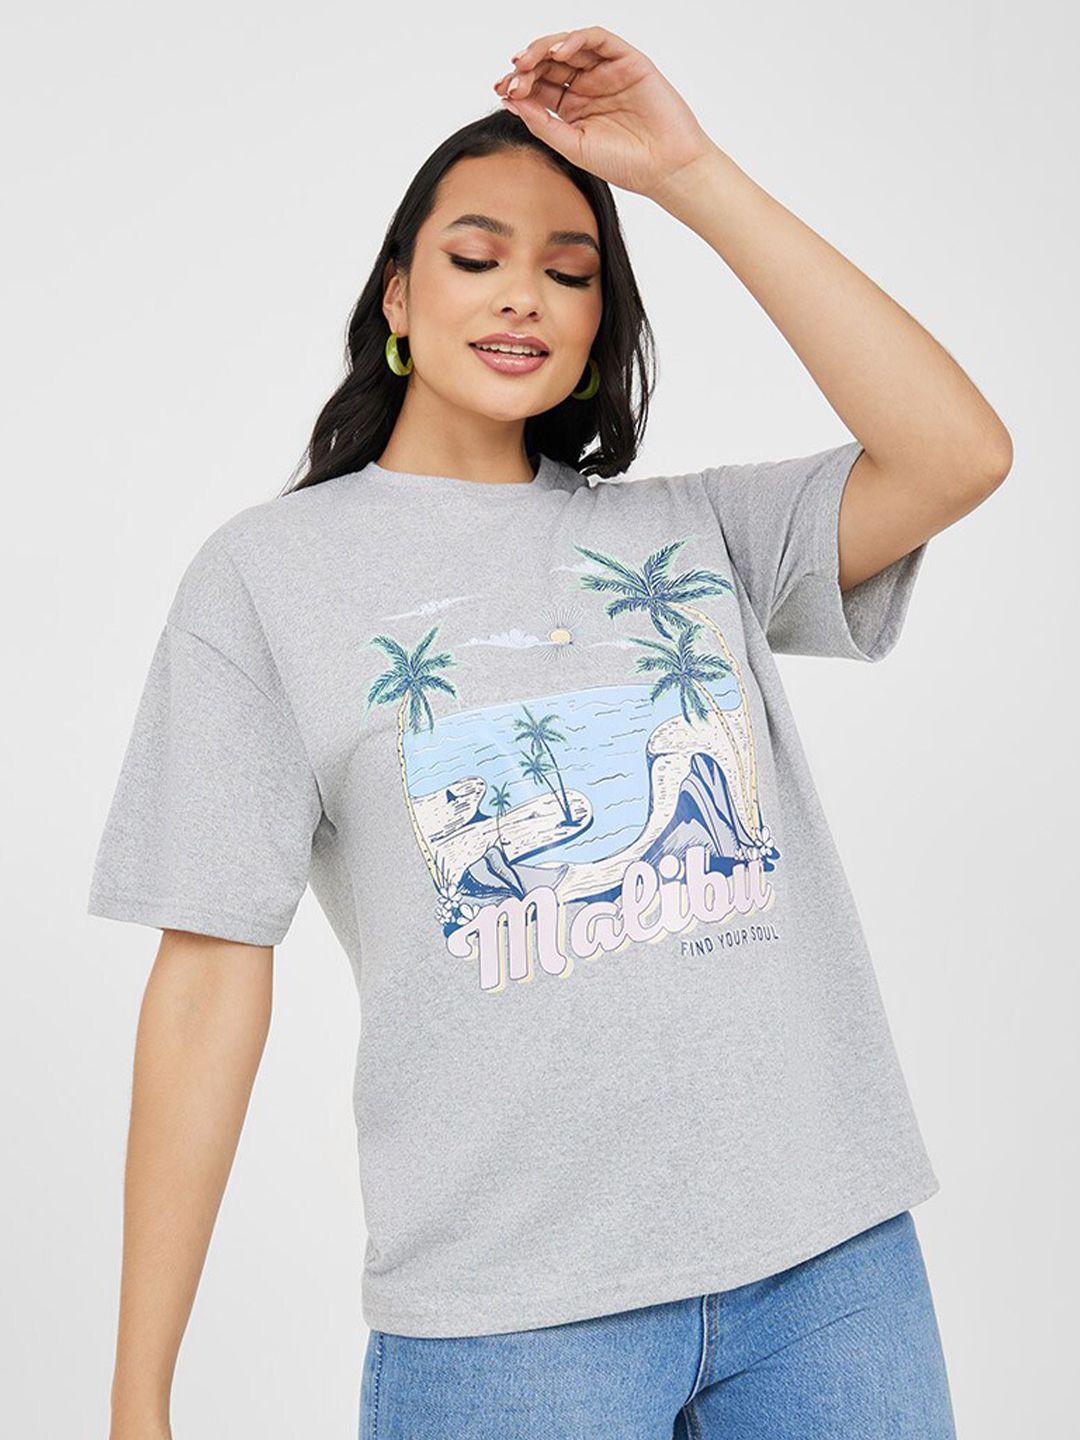 styli-women-grey-floral-printed-tropical-applique-t-shirt